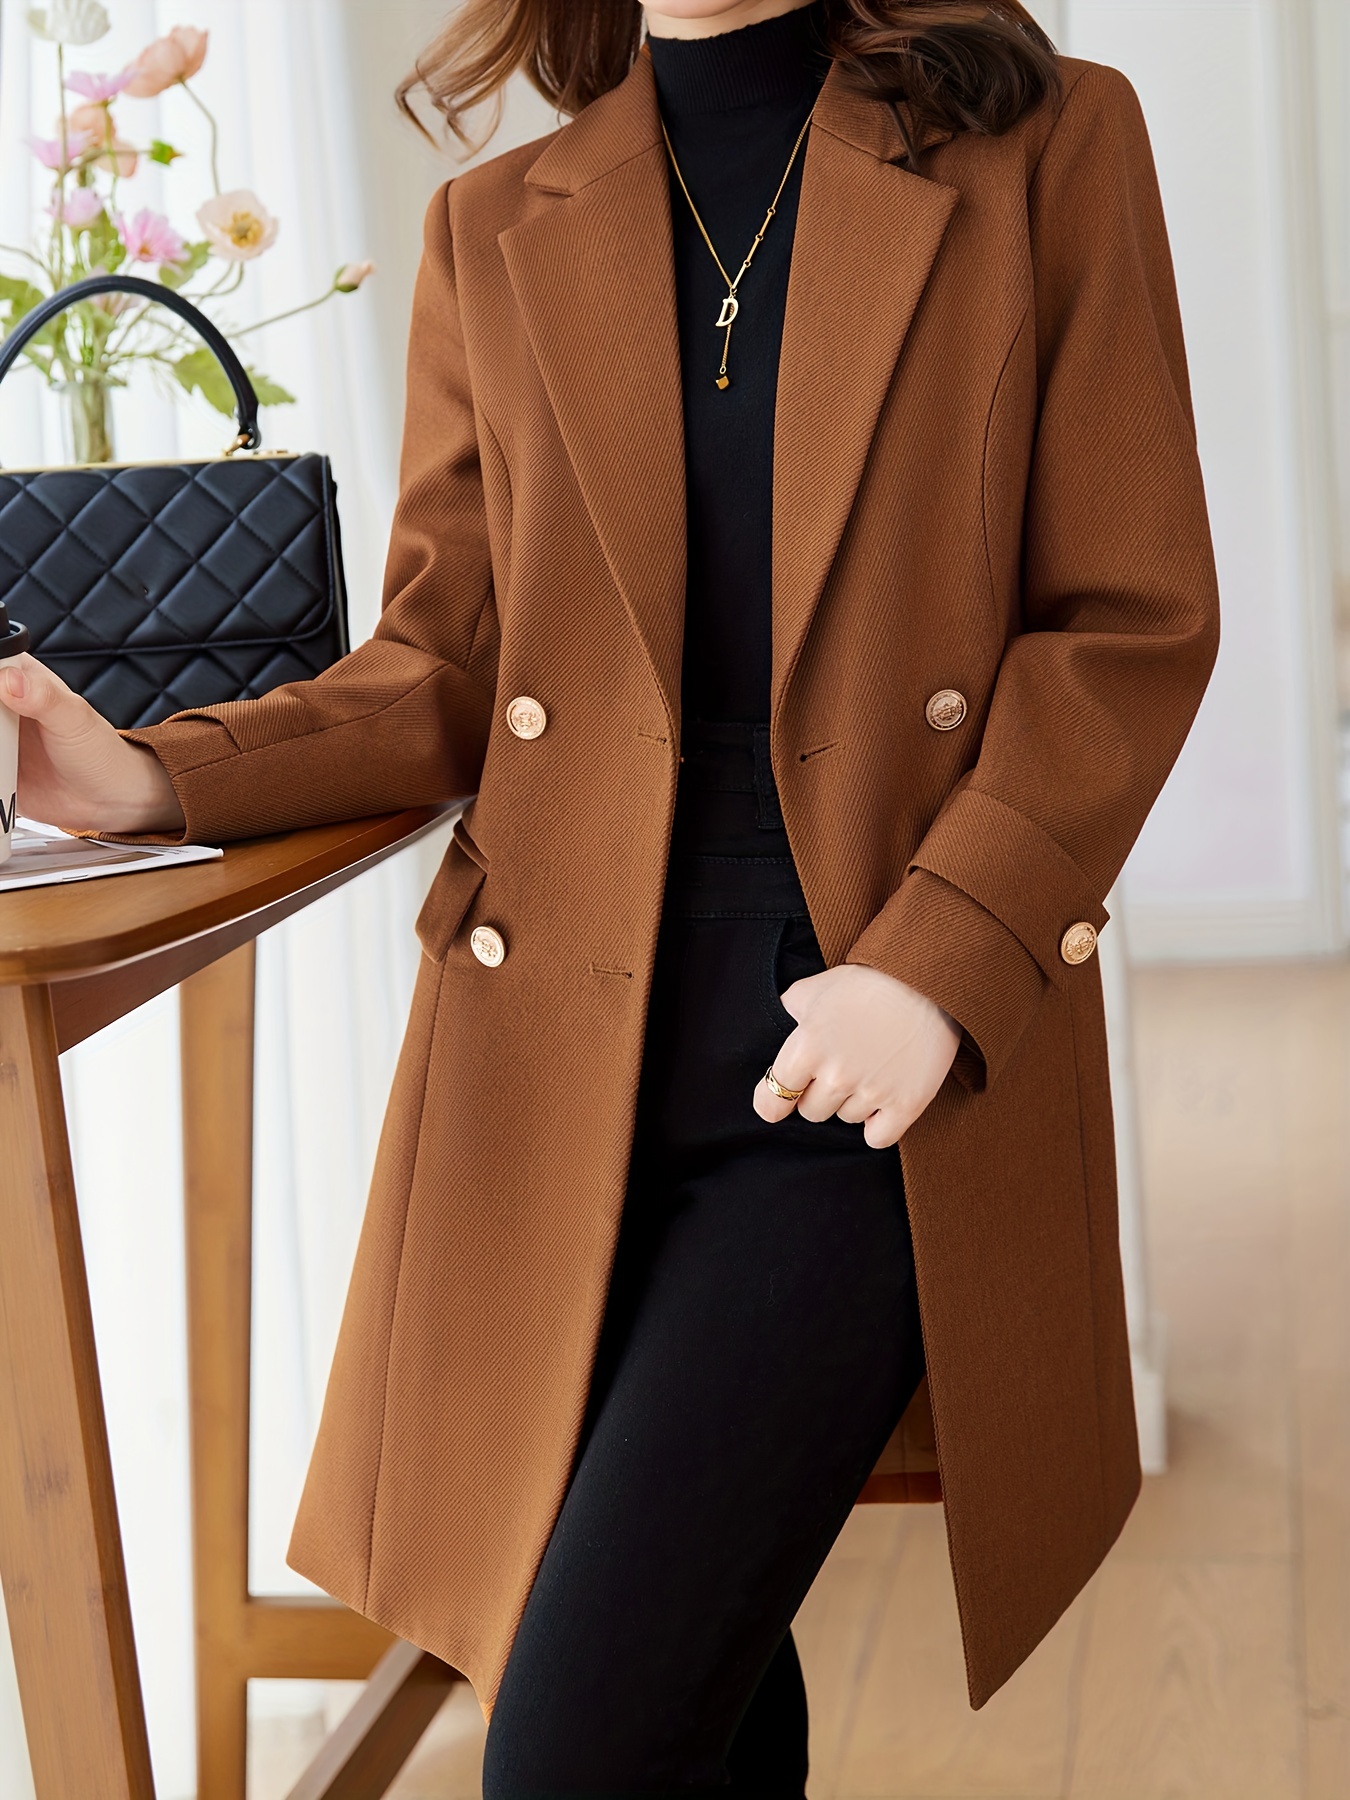 solid double breasted lapel overcoat elegant long sleeve mid length coat for fall winter womens clothing details 8